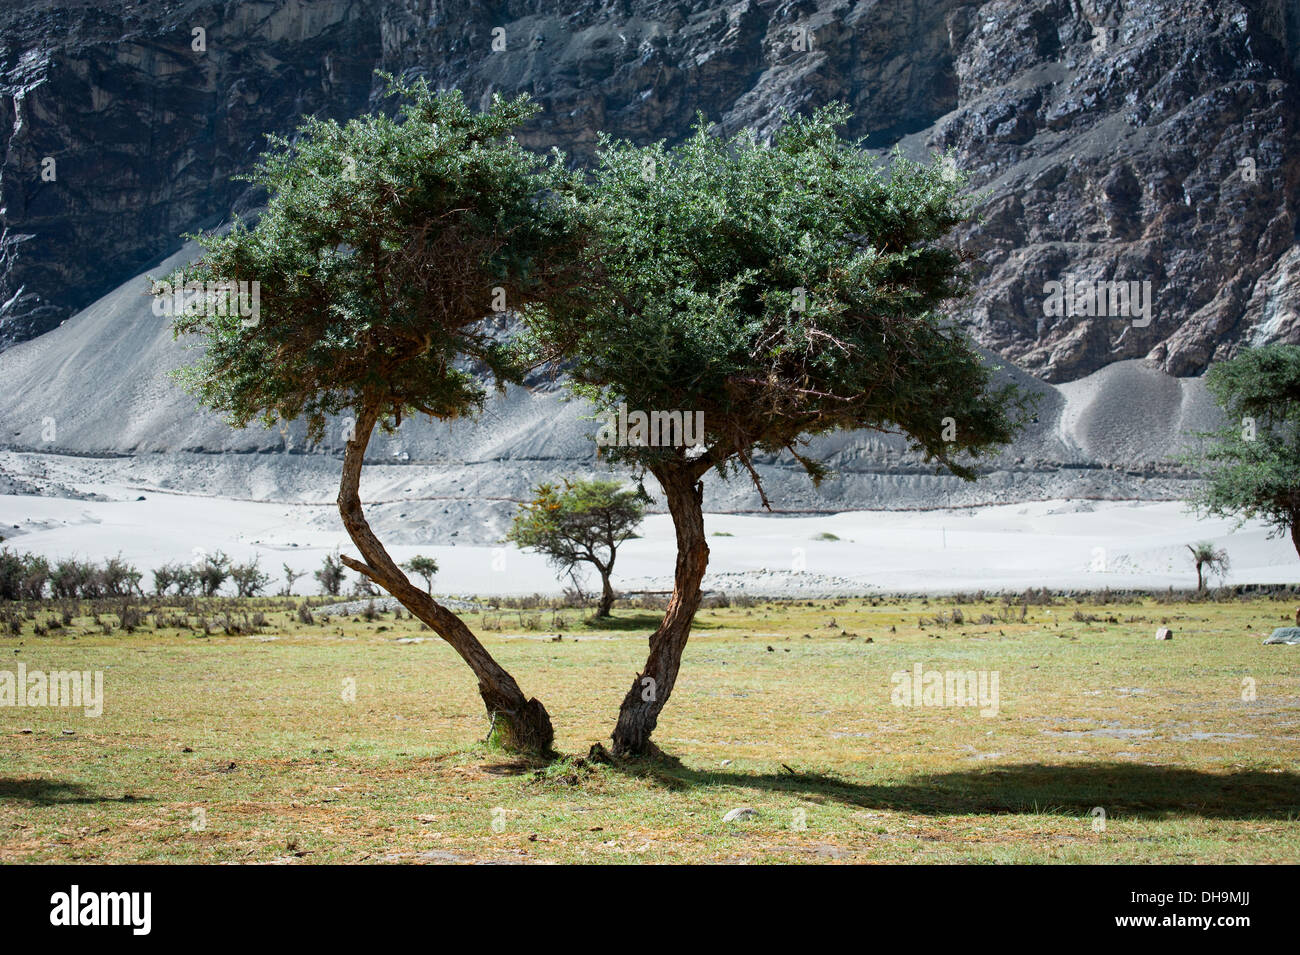 Sunny day view with trees at Nubra Valley. Himalaya mountains landscape. India, Ladakh, altitude 3100 m Stock Photo